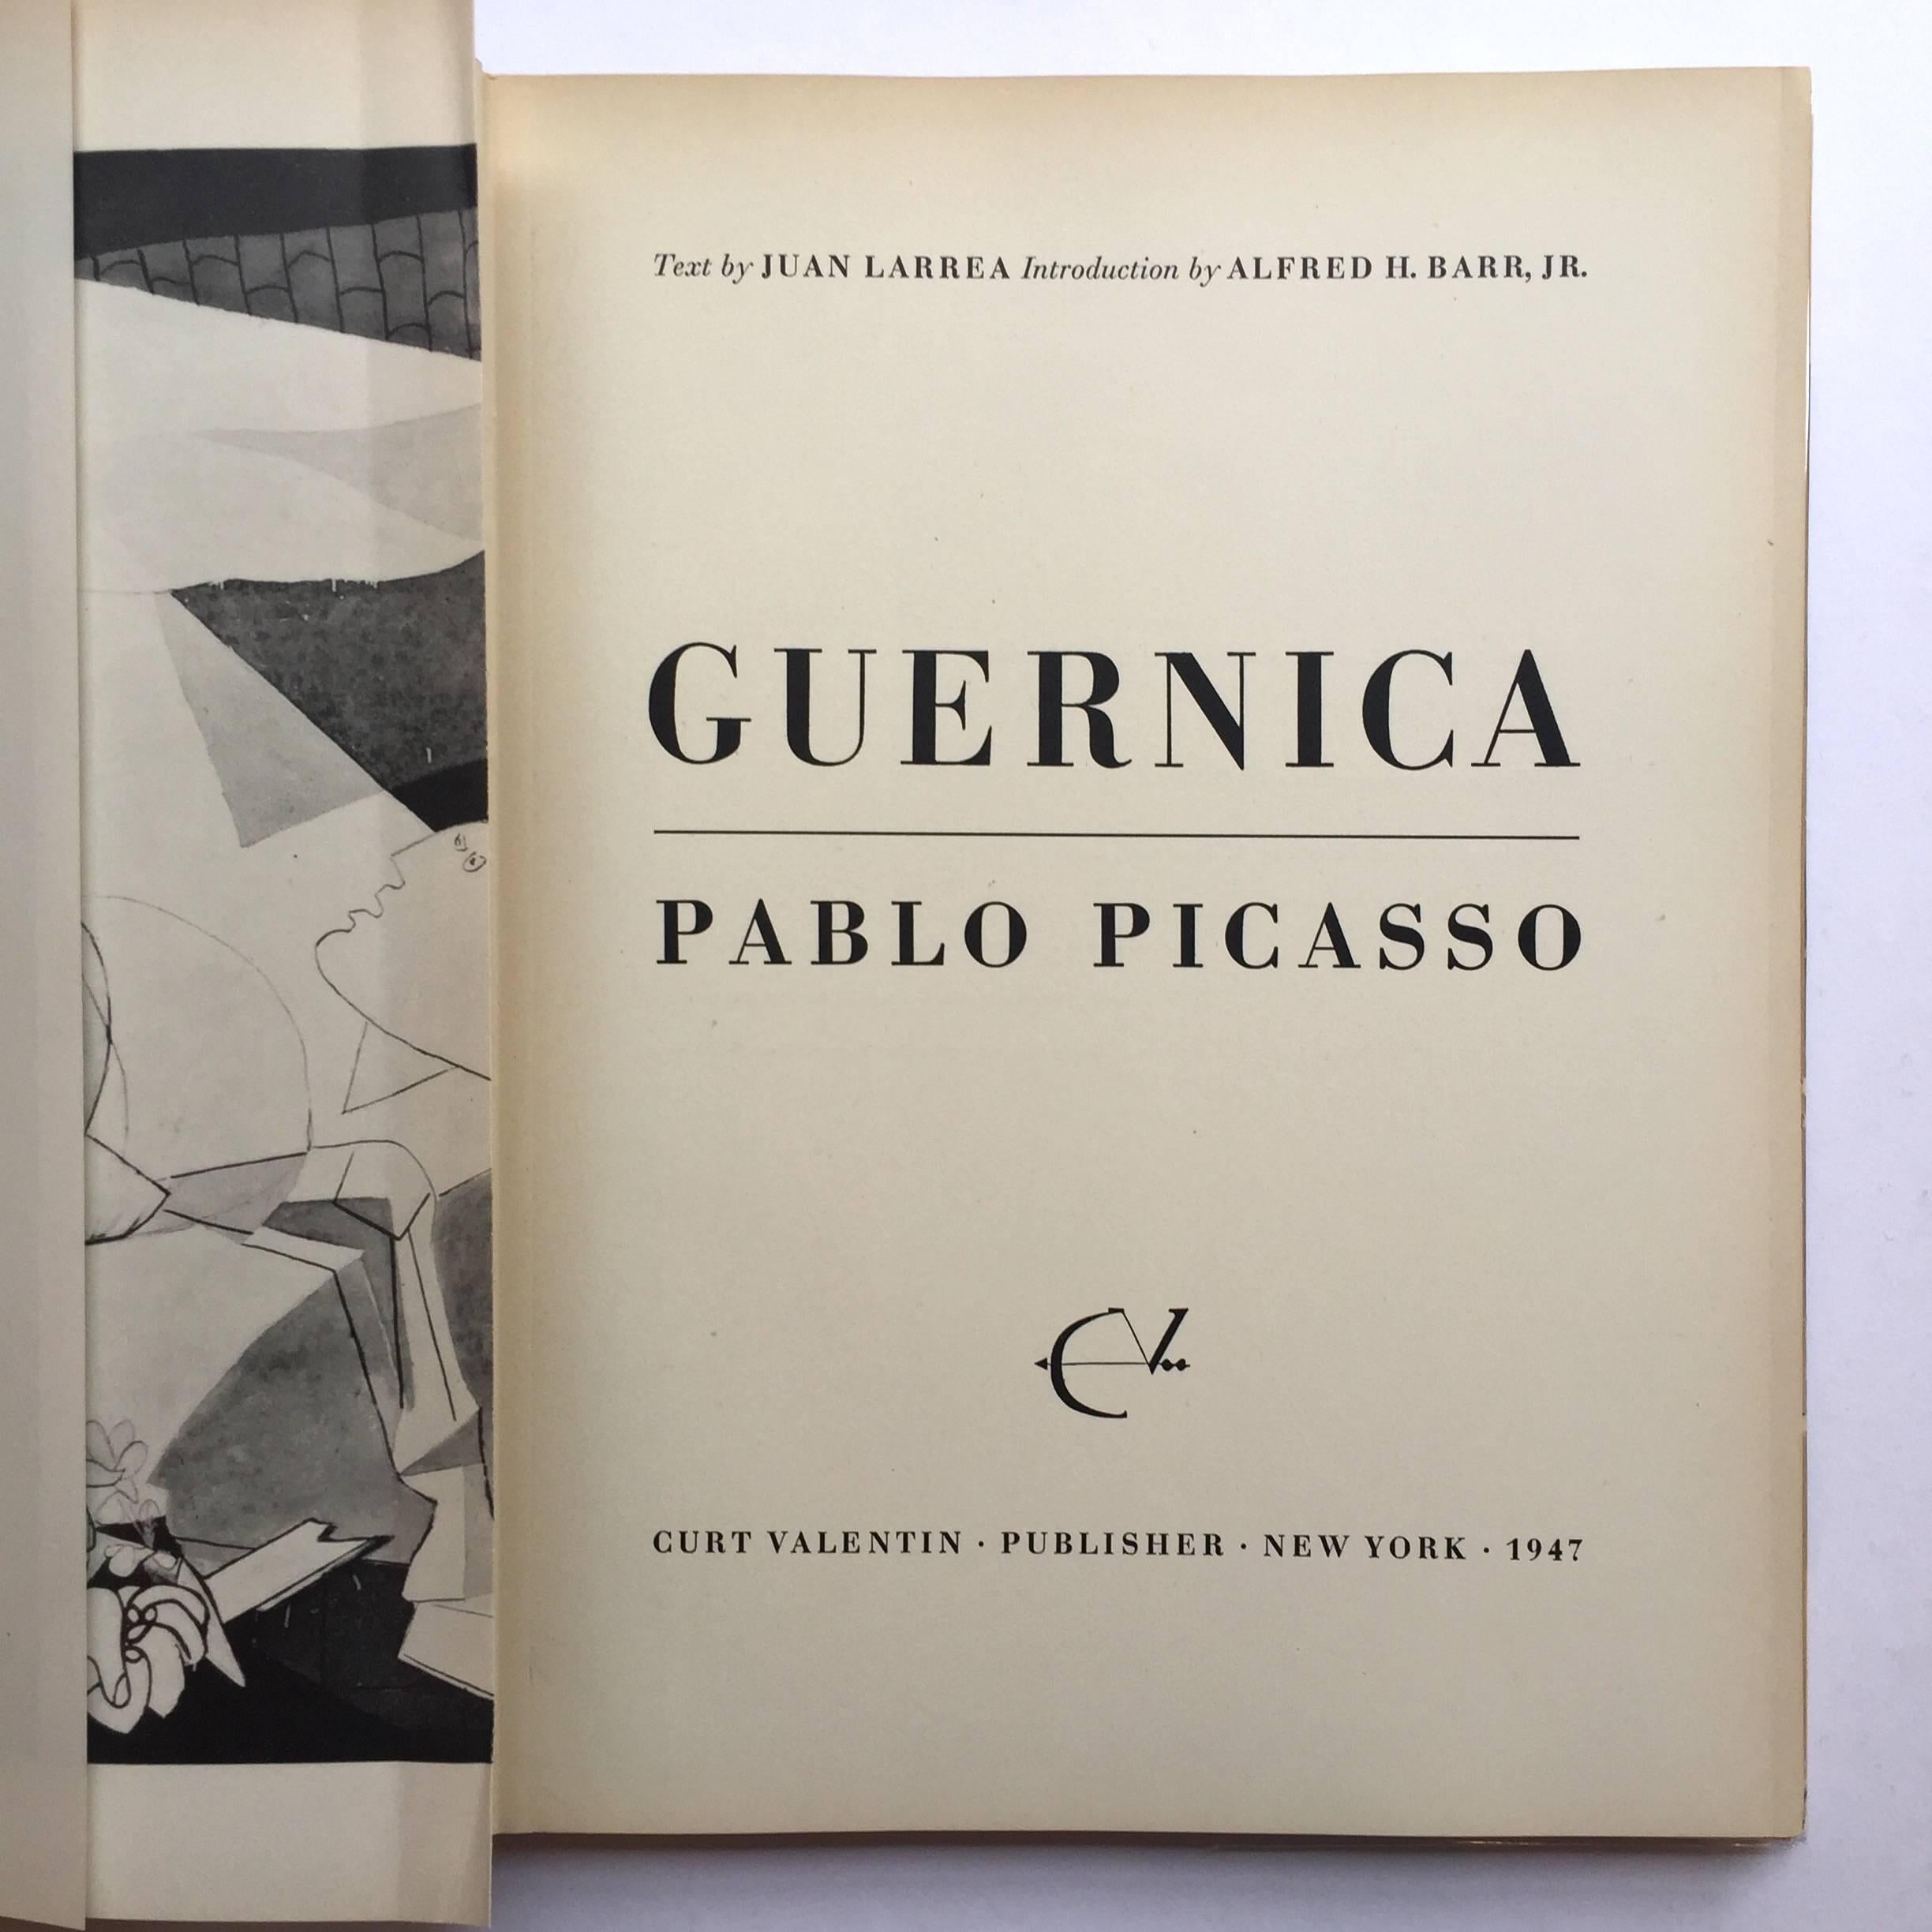 book about guernica